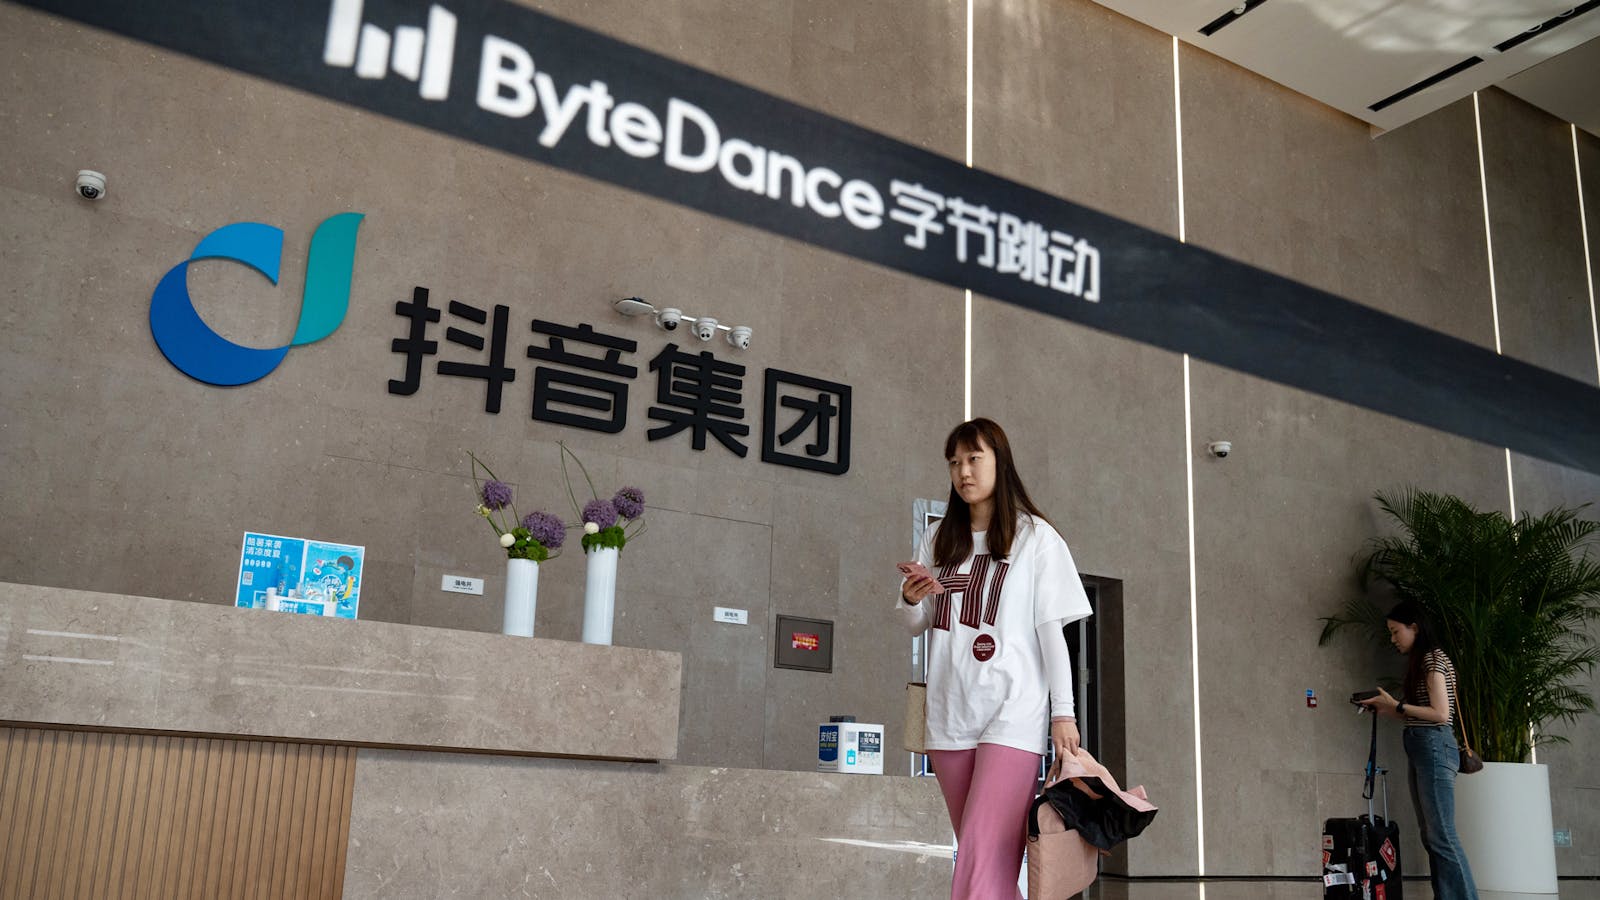 ByteDance's video editor CapCut targets businesses with AI ad scripts and  AI-generated presenters